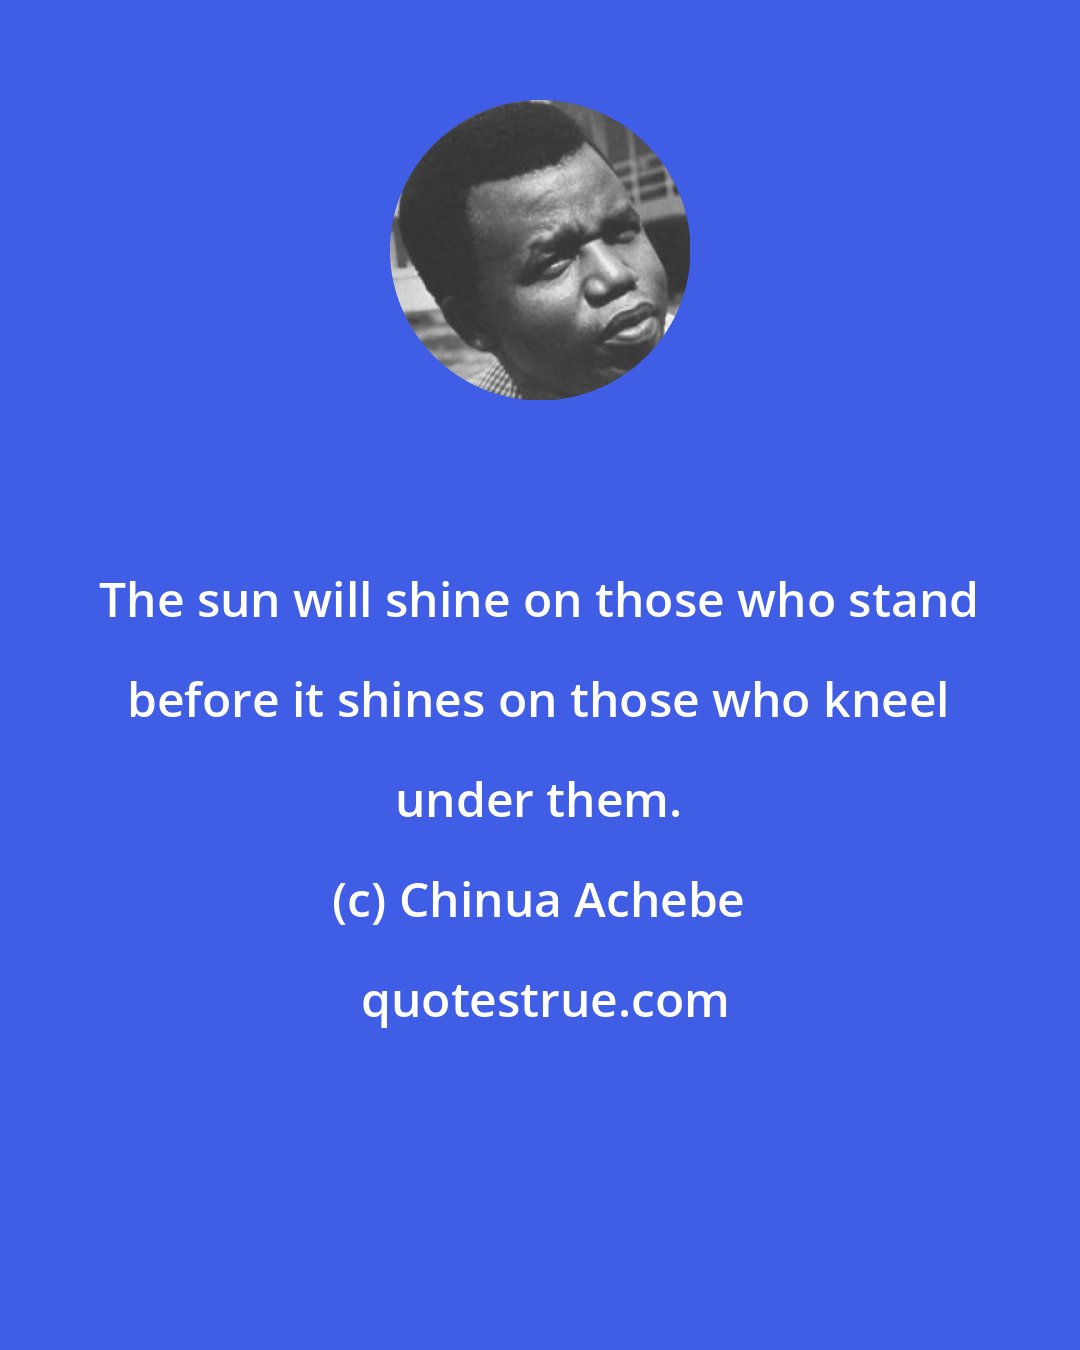 Chinua Achebe: The sun will shine on those who stand before it shines on those who kneel under them.